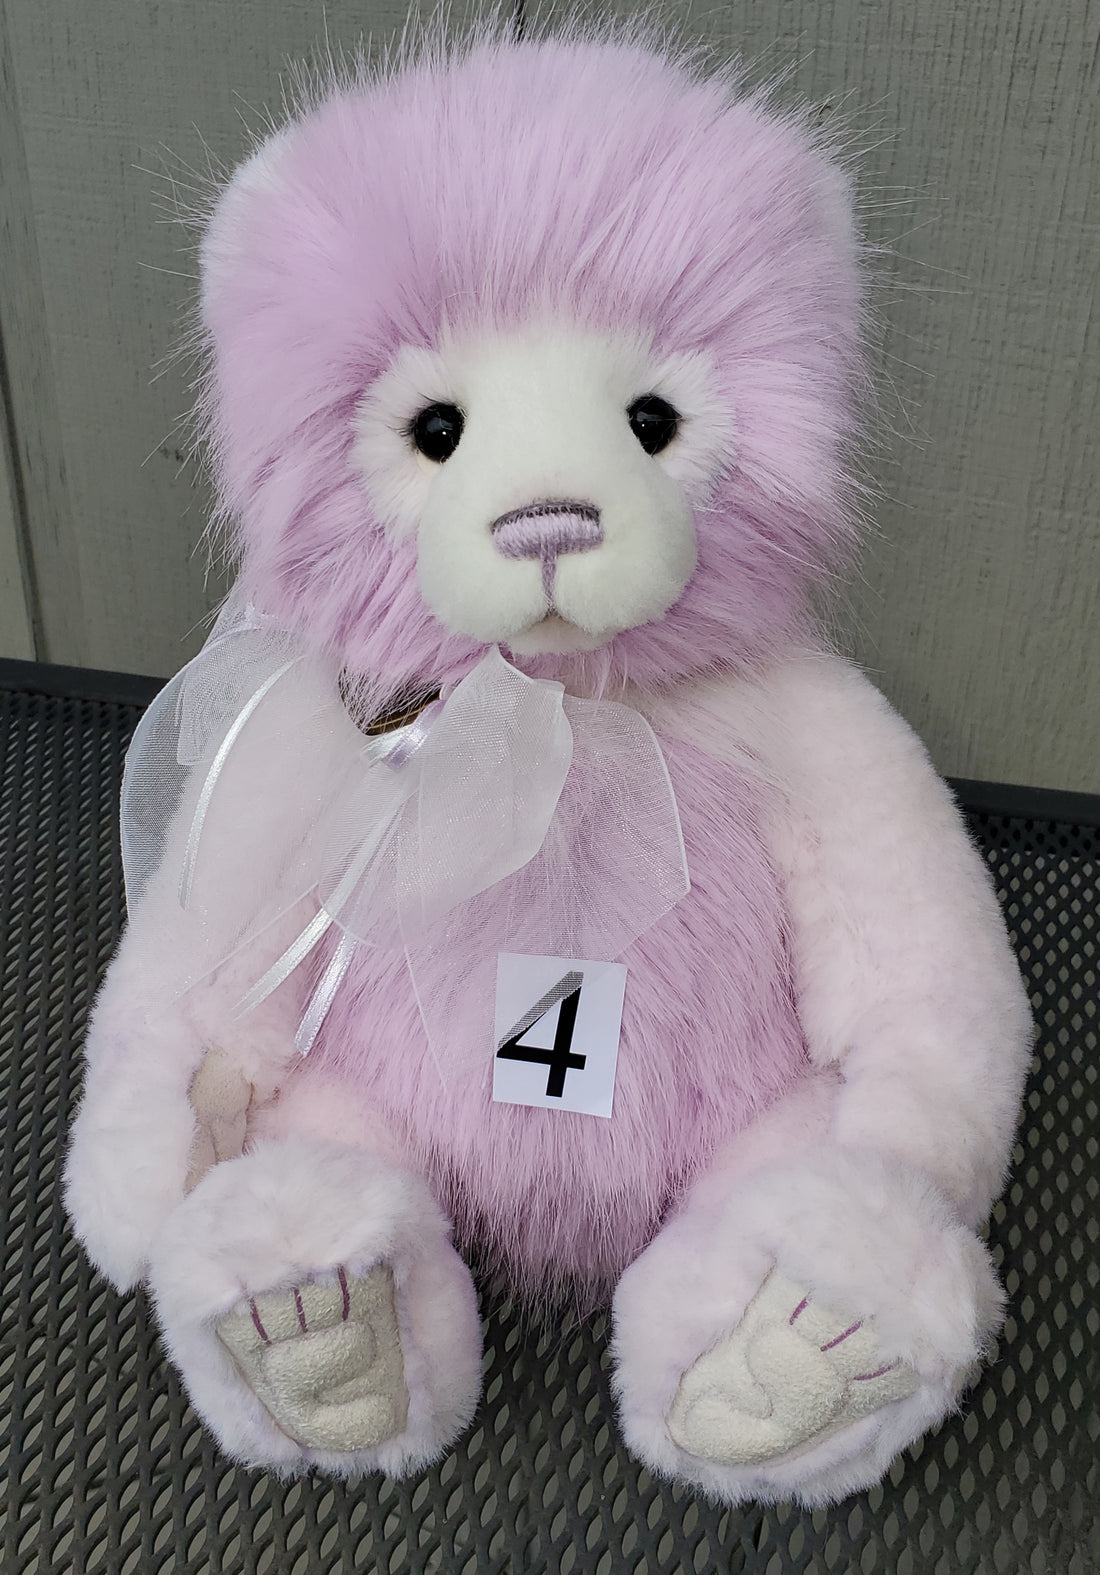 Monica - 12.5" Lavender Plush from Charlie Bears' Secret Collection